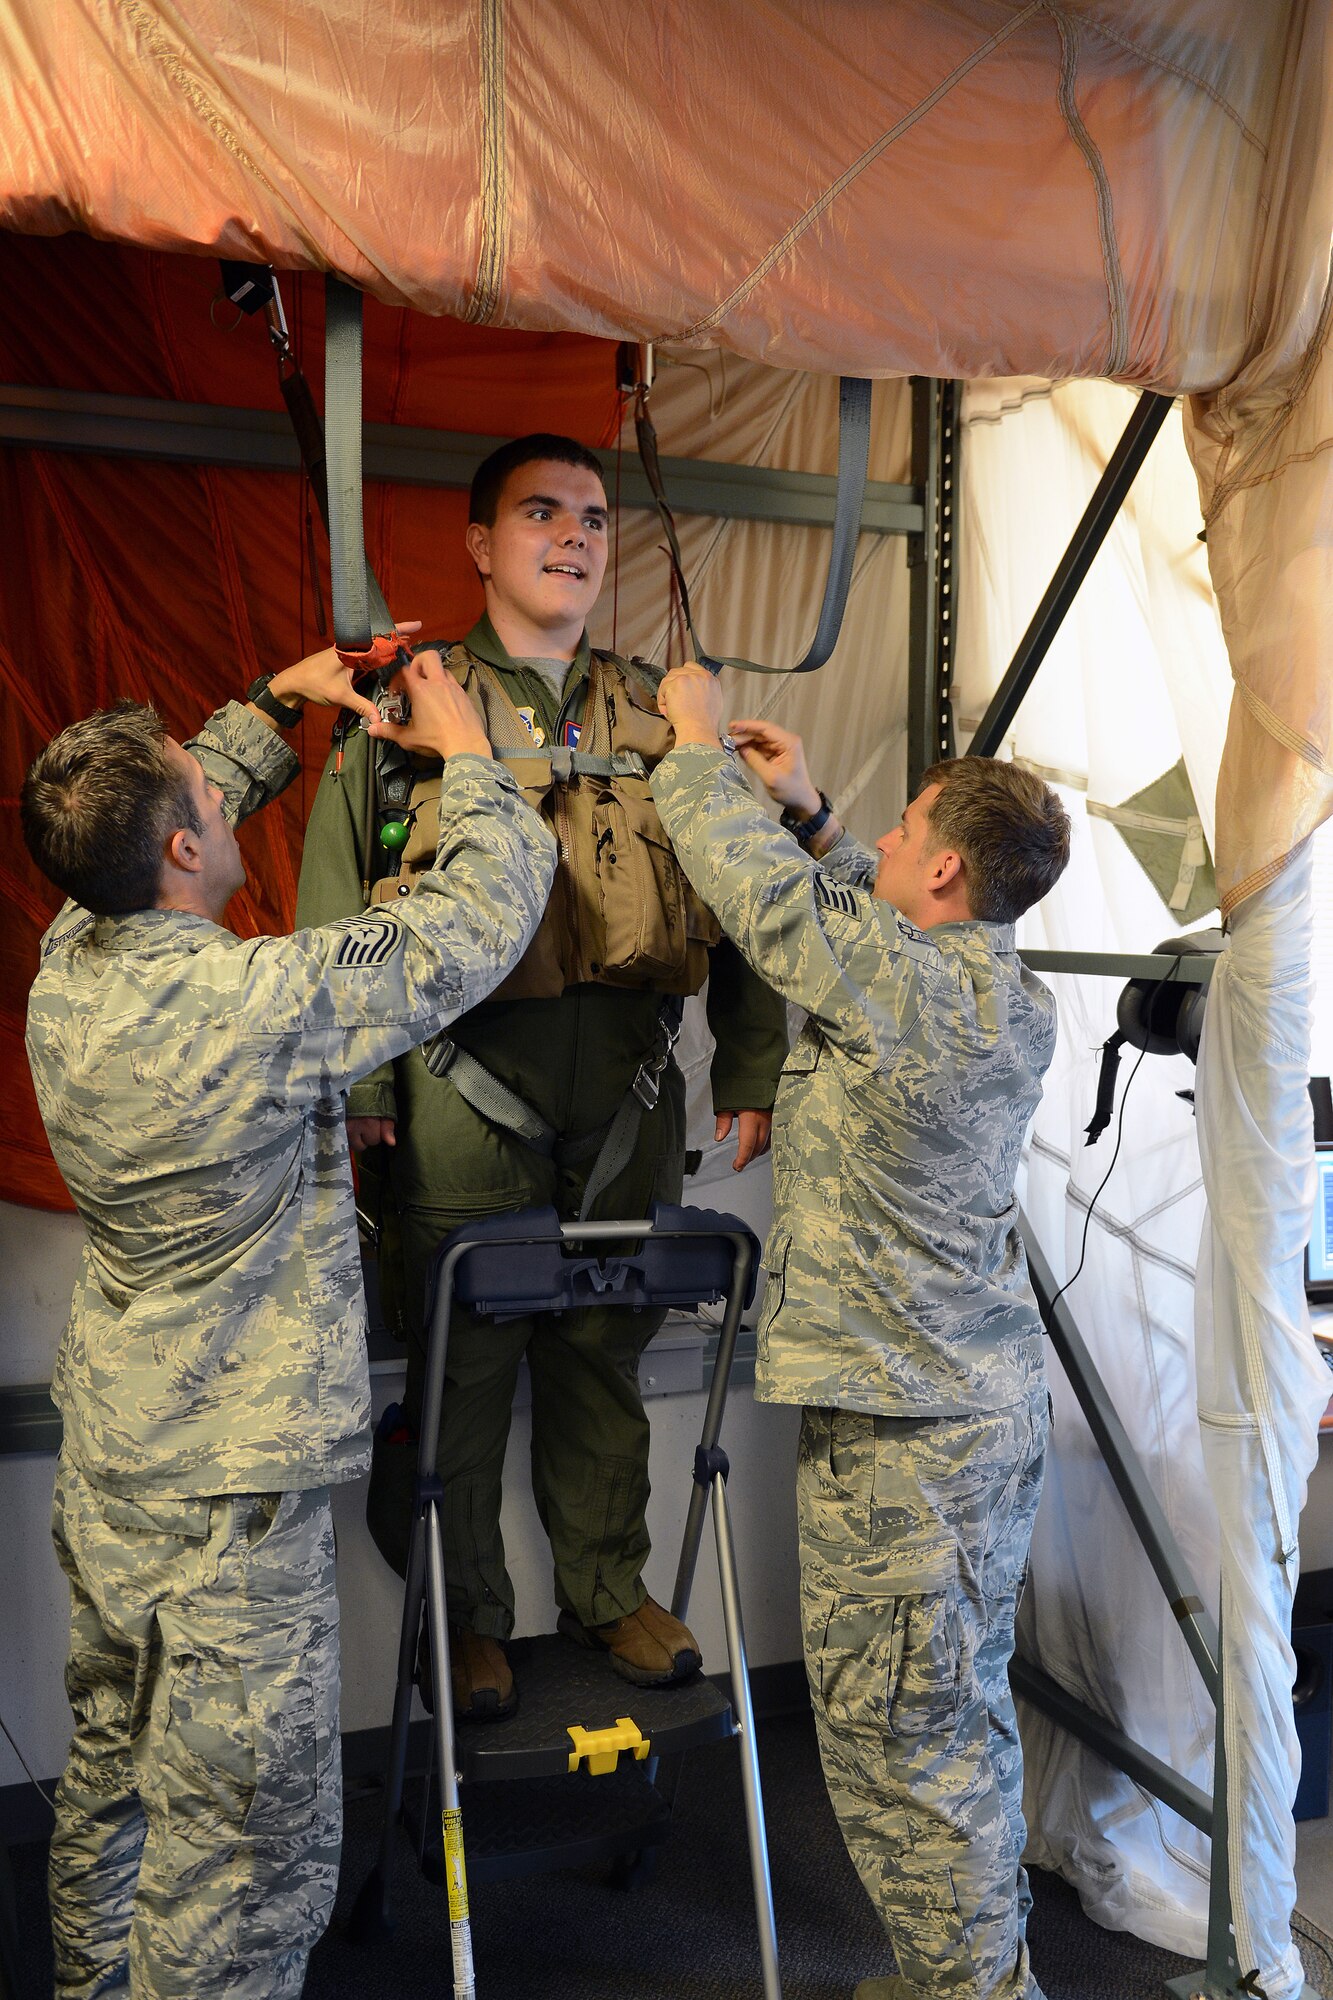 Tech. Sgt. Logan Davis (left), 62nd Operations Support Squadron survival, evasion, resistance and escape specialist, and Staff. Sgt. Kevin Randall (far right), 62nd OSS SERE specialist, strap Jerry Connolly, pilot for a day, into a parachuting simulator July 14, 2014, at Joint Base Lewis McChord, Wash. Prior to simulating parachuting, Connolly was given instructions on parachuting safety. (U. S. Air Force photo/Airman 1st Class Jacob Jimenez)